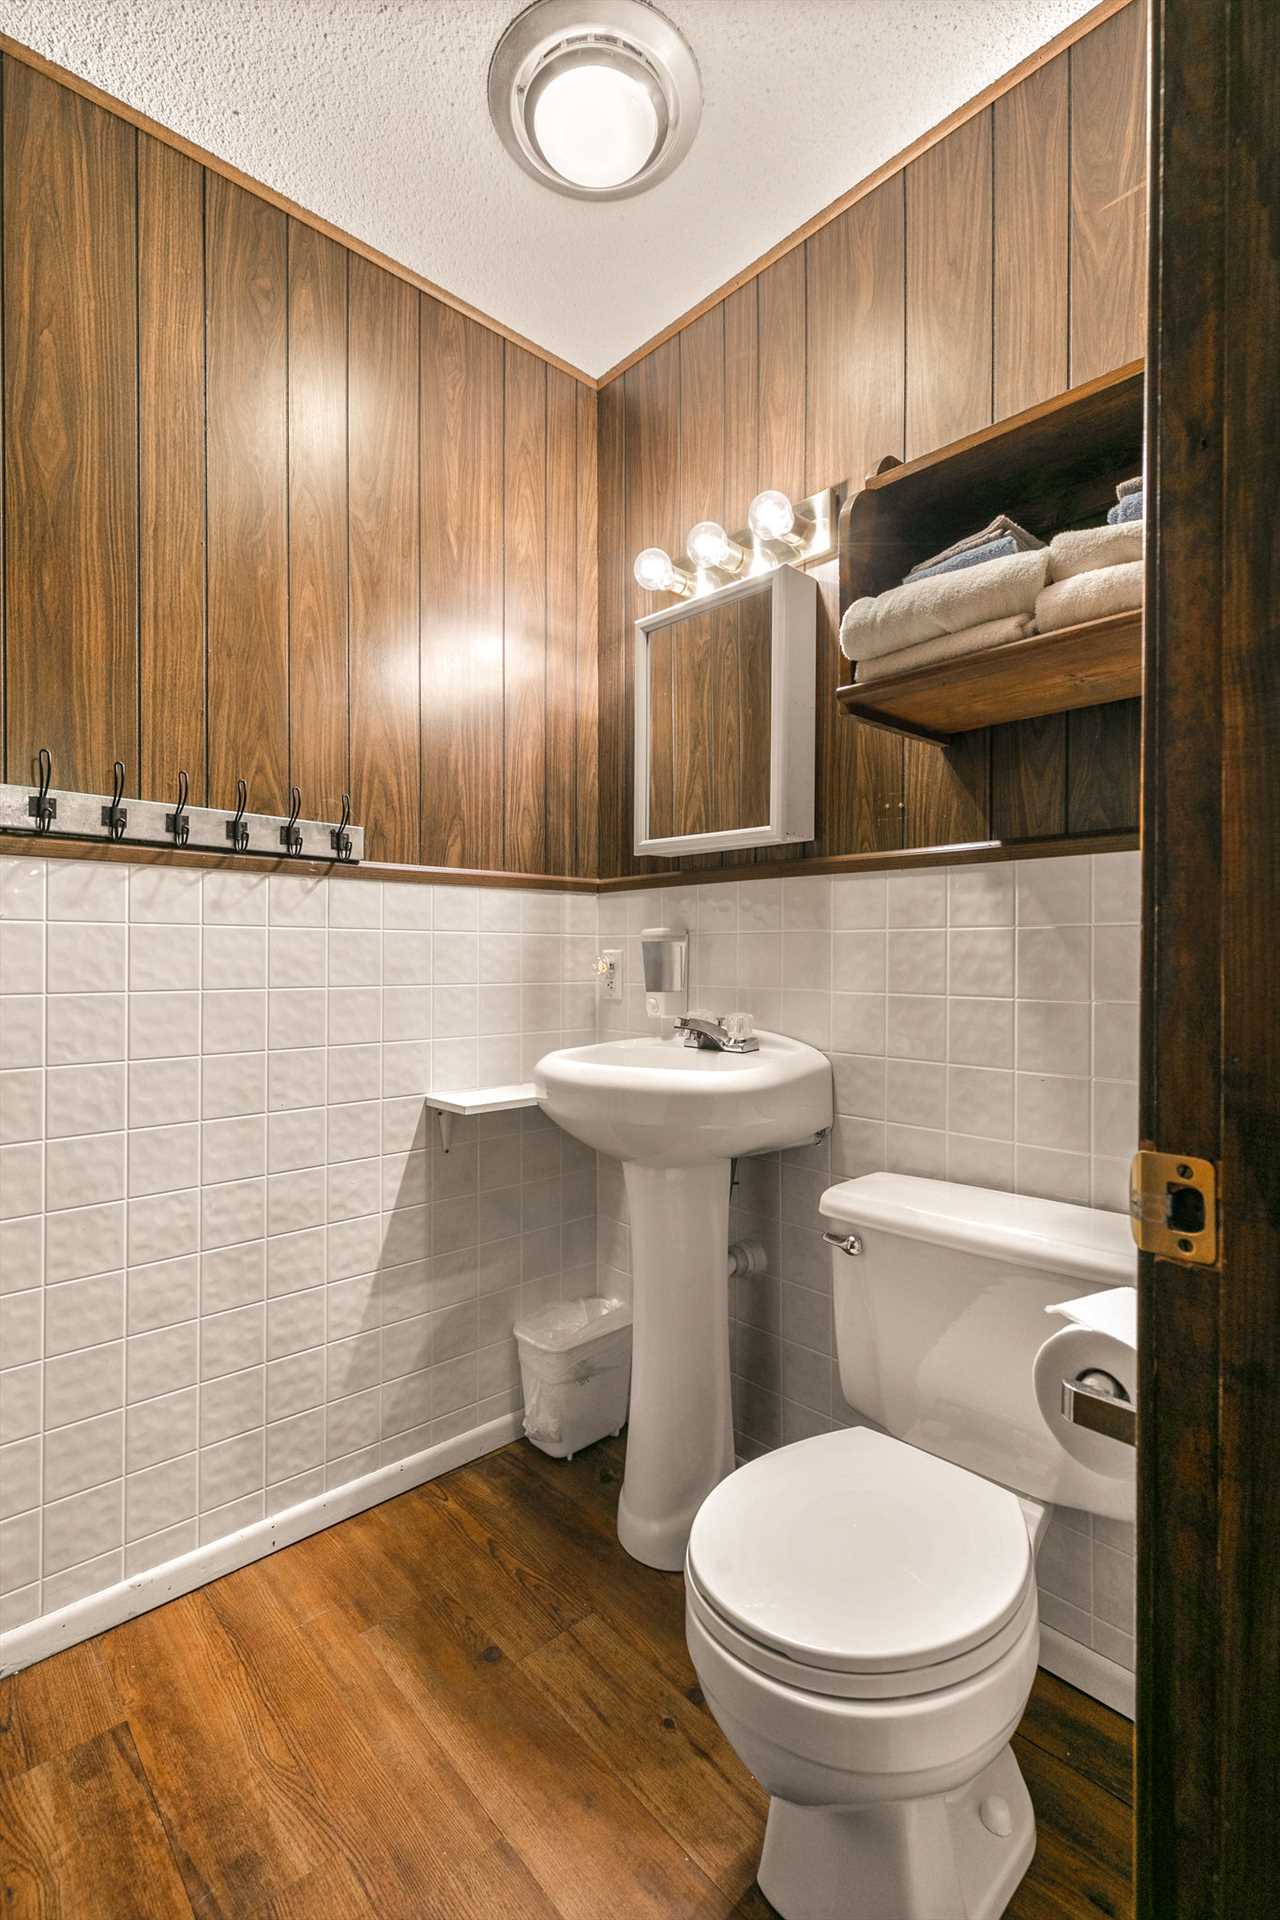 The bathroom is located off the living area. (Cabin 10)